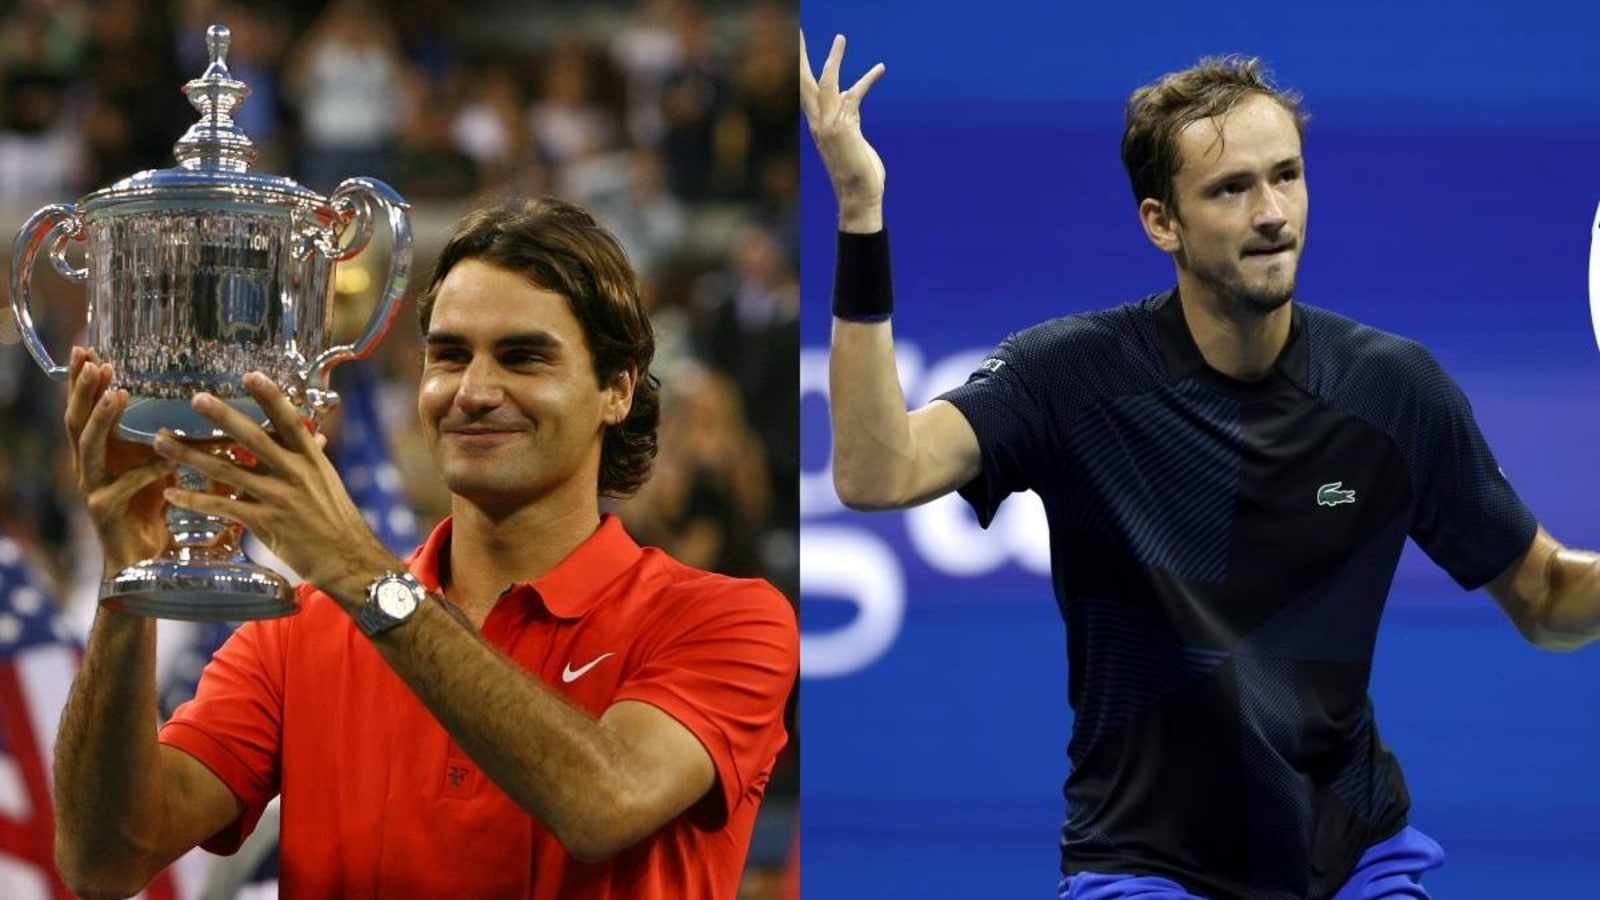 Roger Federer’s magnificent 17-year-old feat remains intact with Daniil Medvedev’s US Open exit